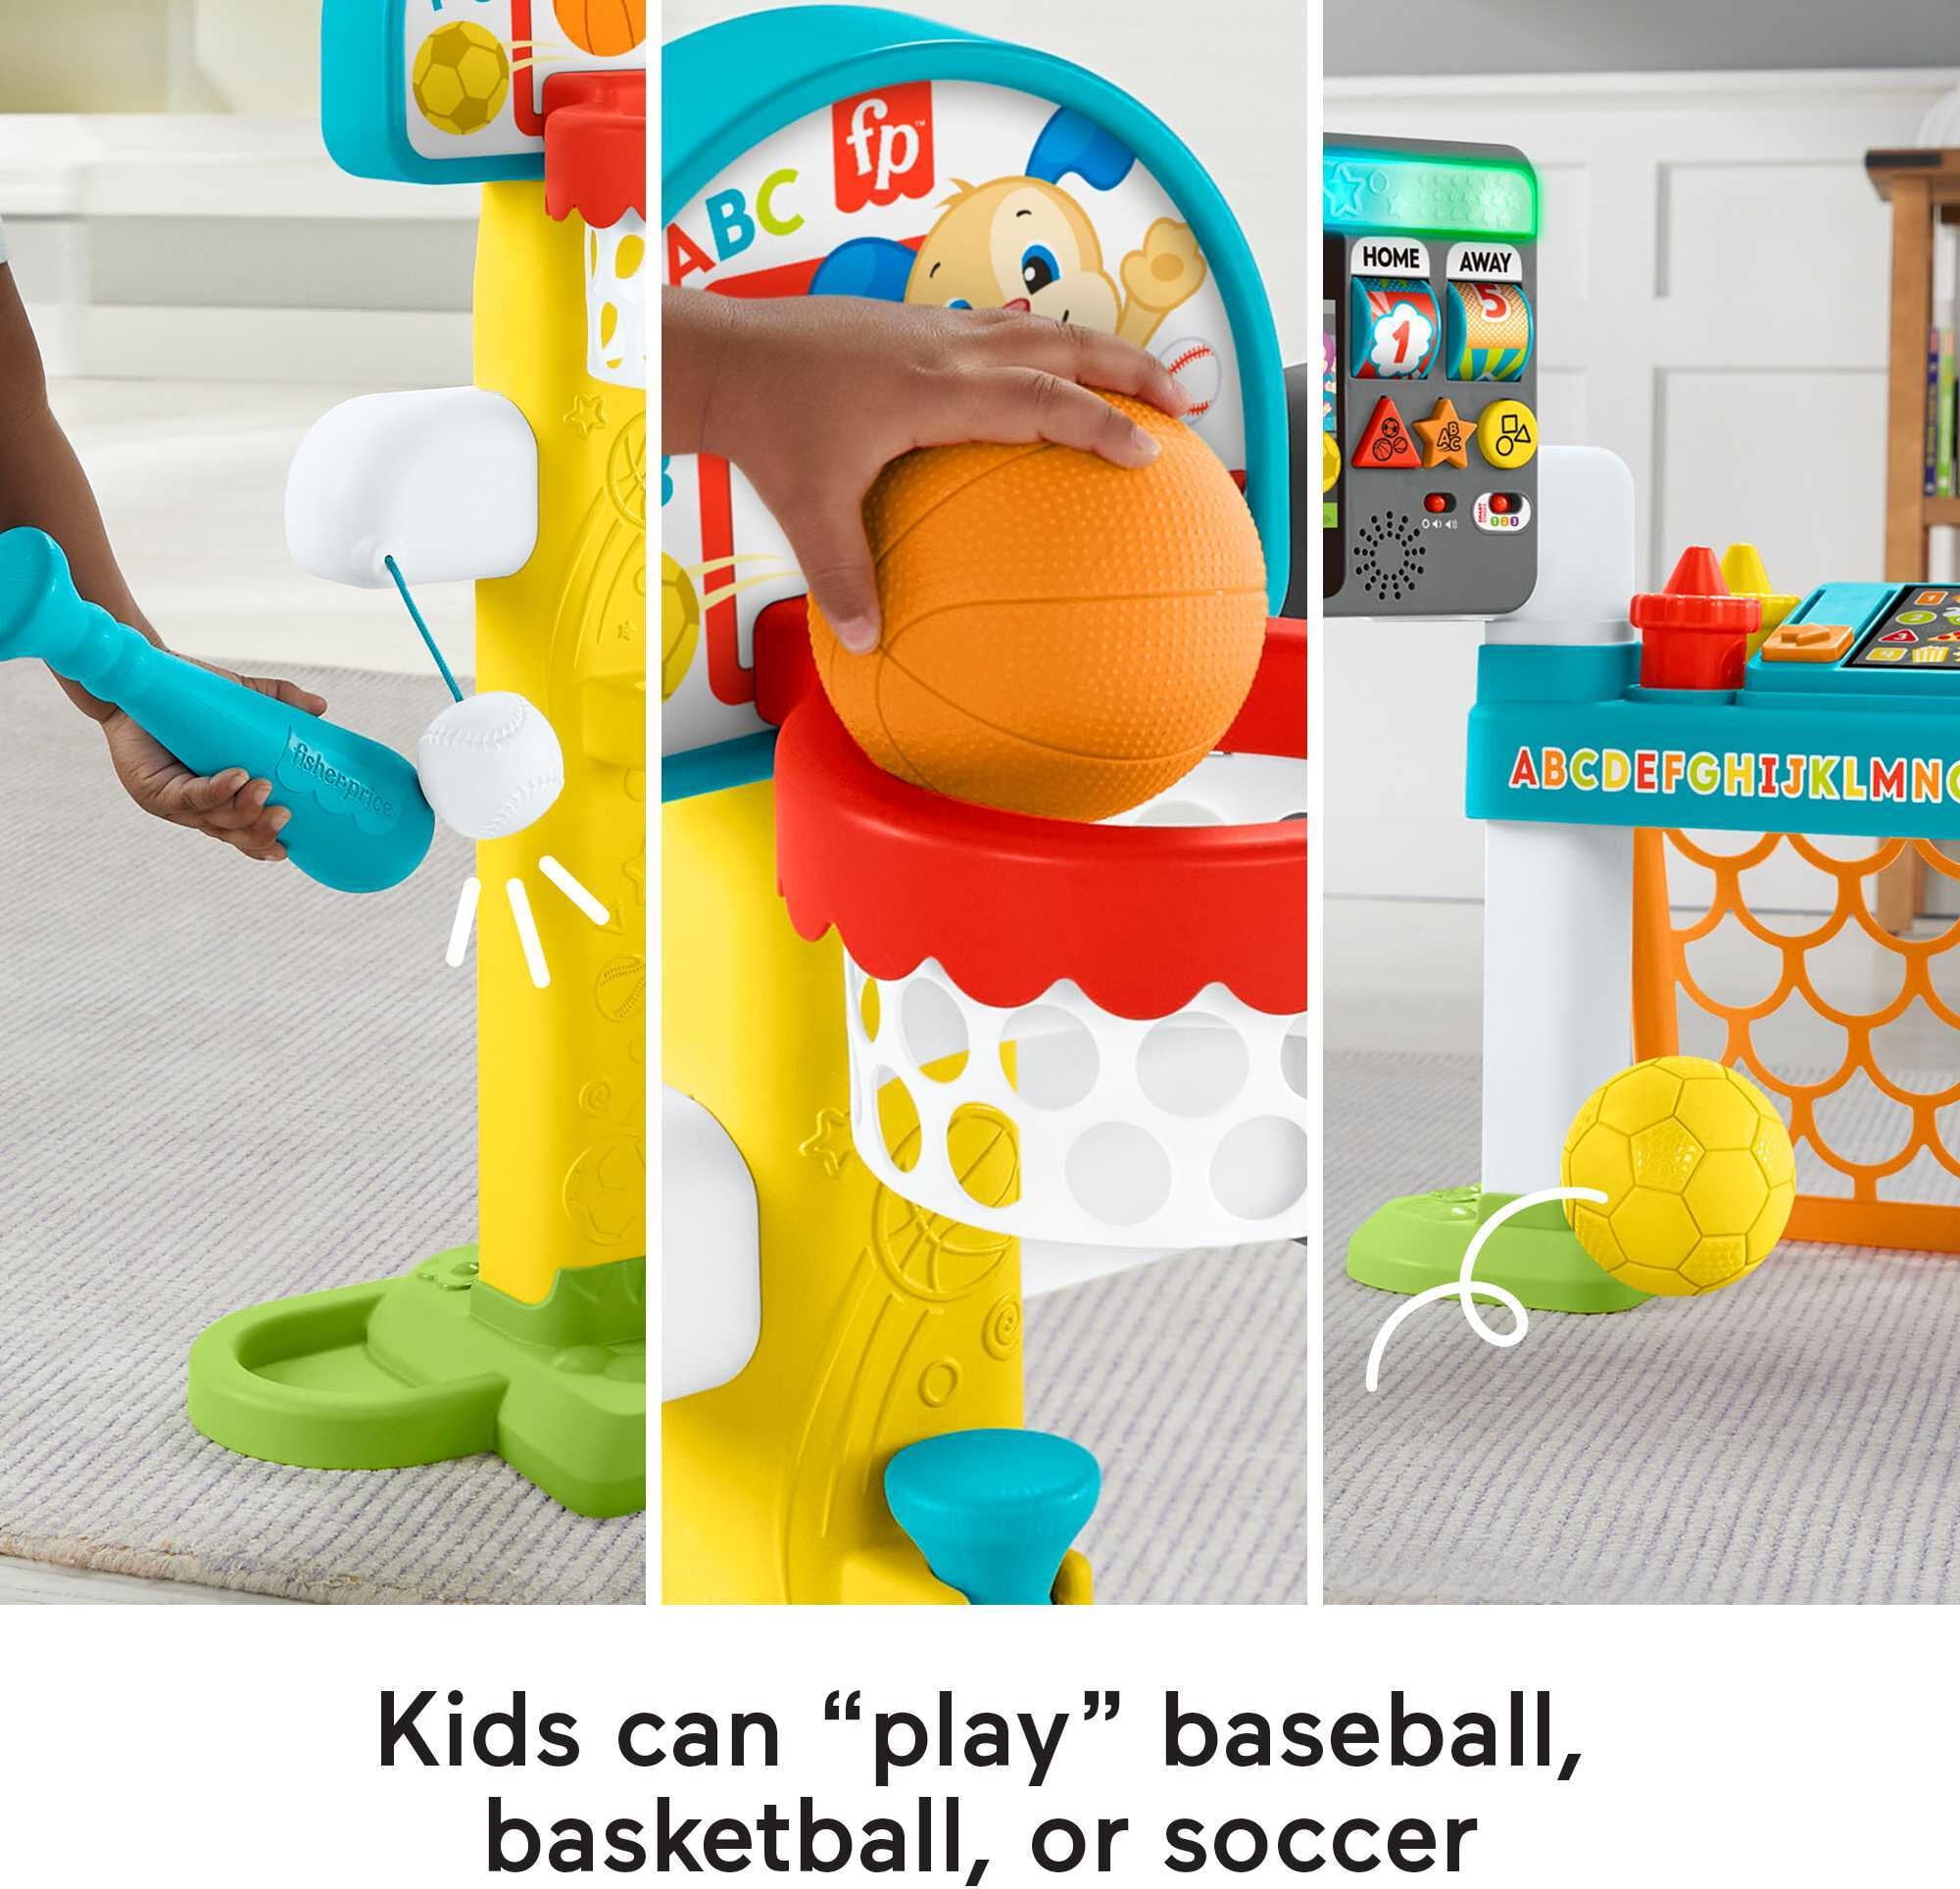 Fisher-Price Laugh & Learn Sports Activity Center Toddler Learning Toy, 4-in-1 Game Experience - 2